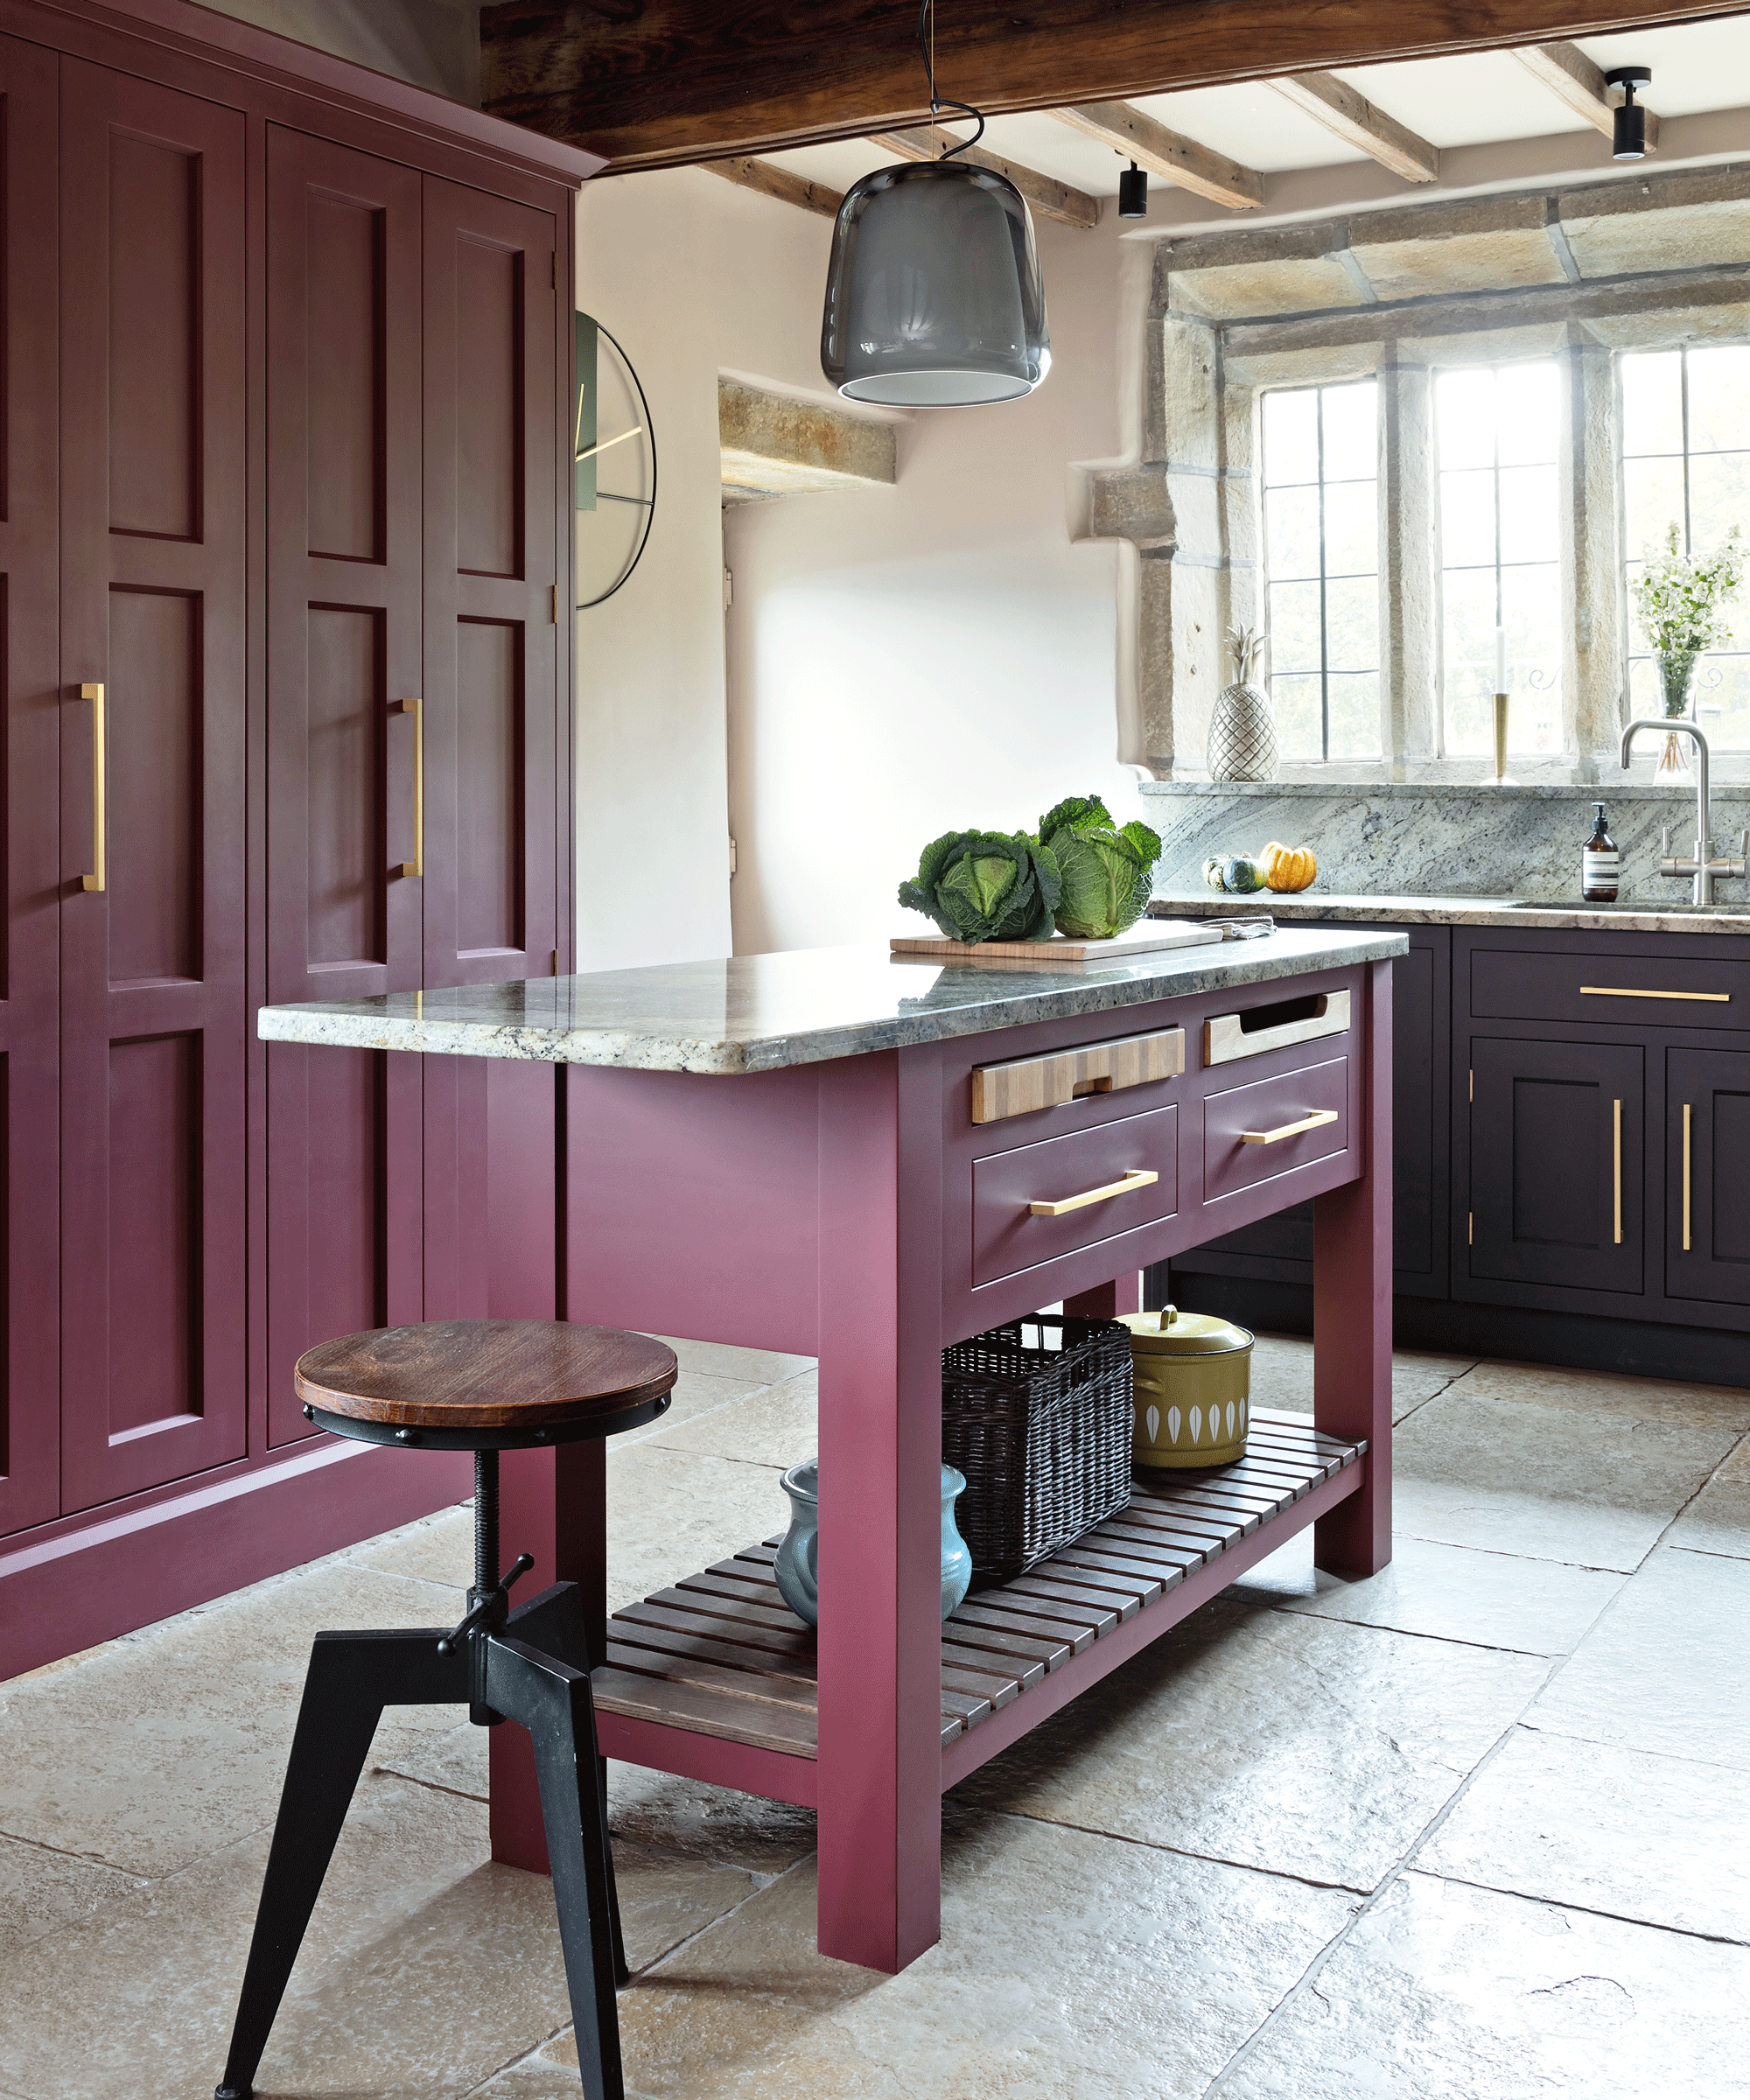 A burgundy freestanding kitchen island with a marble top and an industrial style bar stool